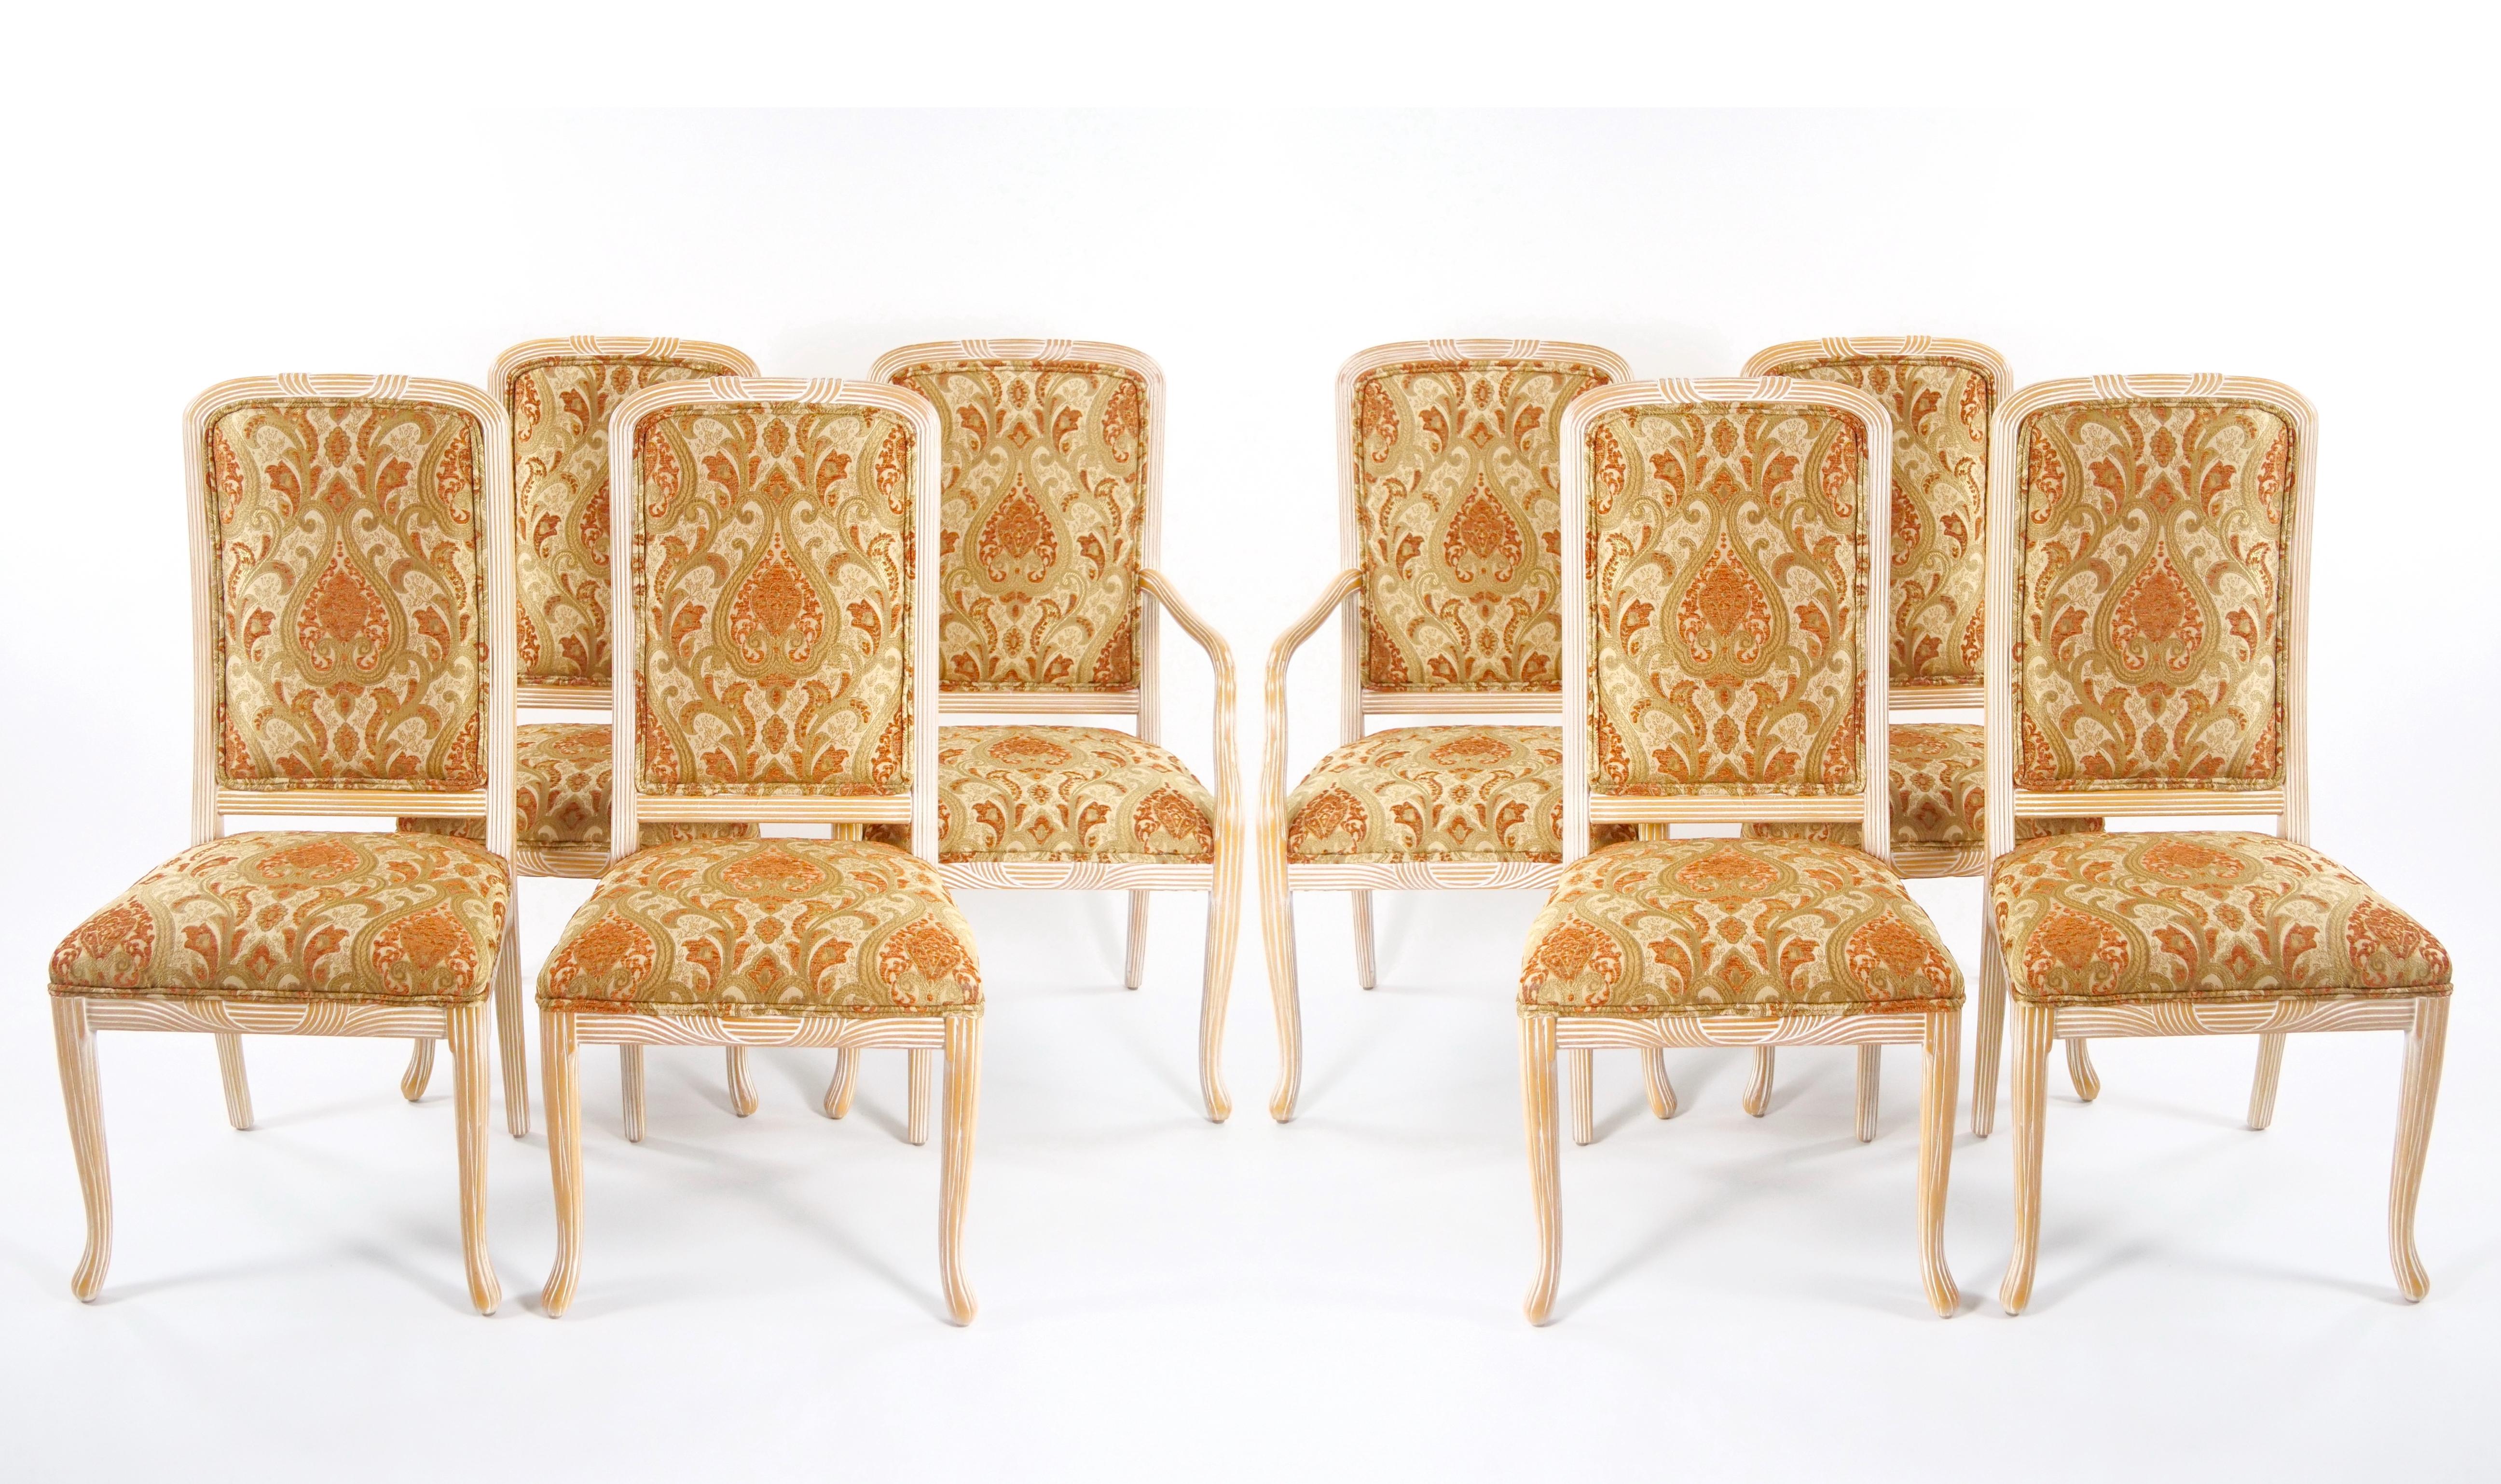 Transform your dining space into a masterpiece with our stunning Mid-20th Century Hand-Painted/Carved Italian Dining Room Chair Set, expertly crafted to accommodate 8 discerning individuals. Each chair is a testament to the refined artistry and